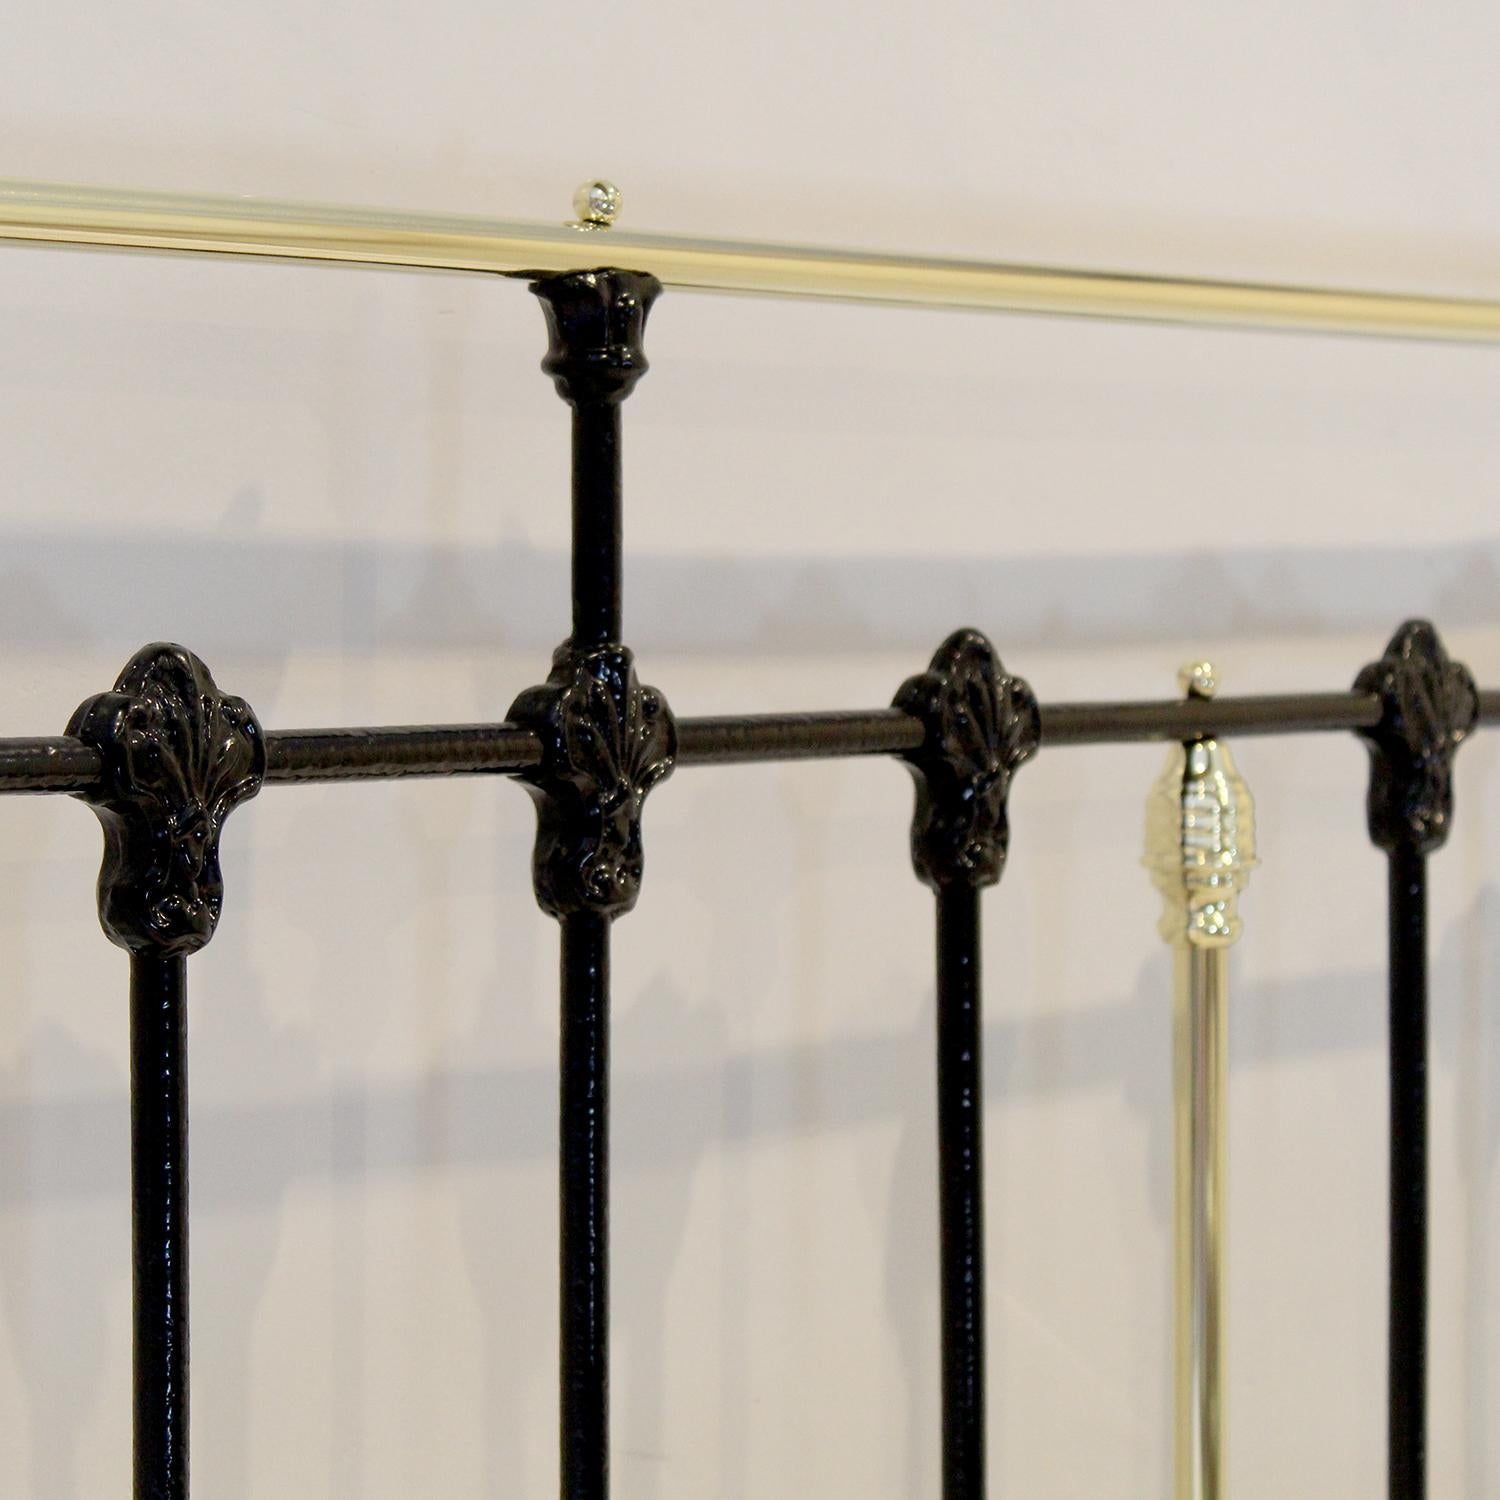 Antique Brass and Iron Bed in Black, MK255 1